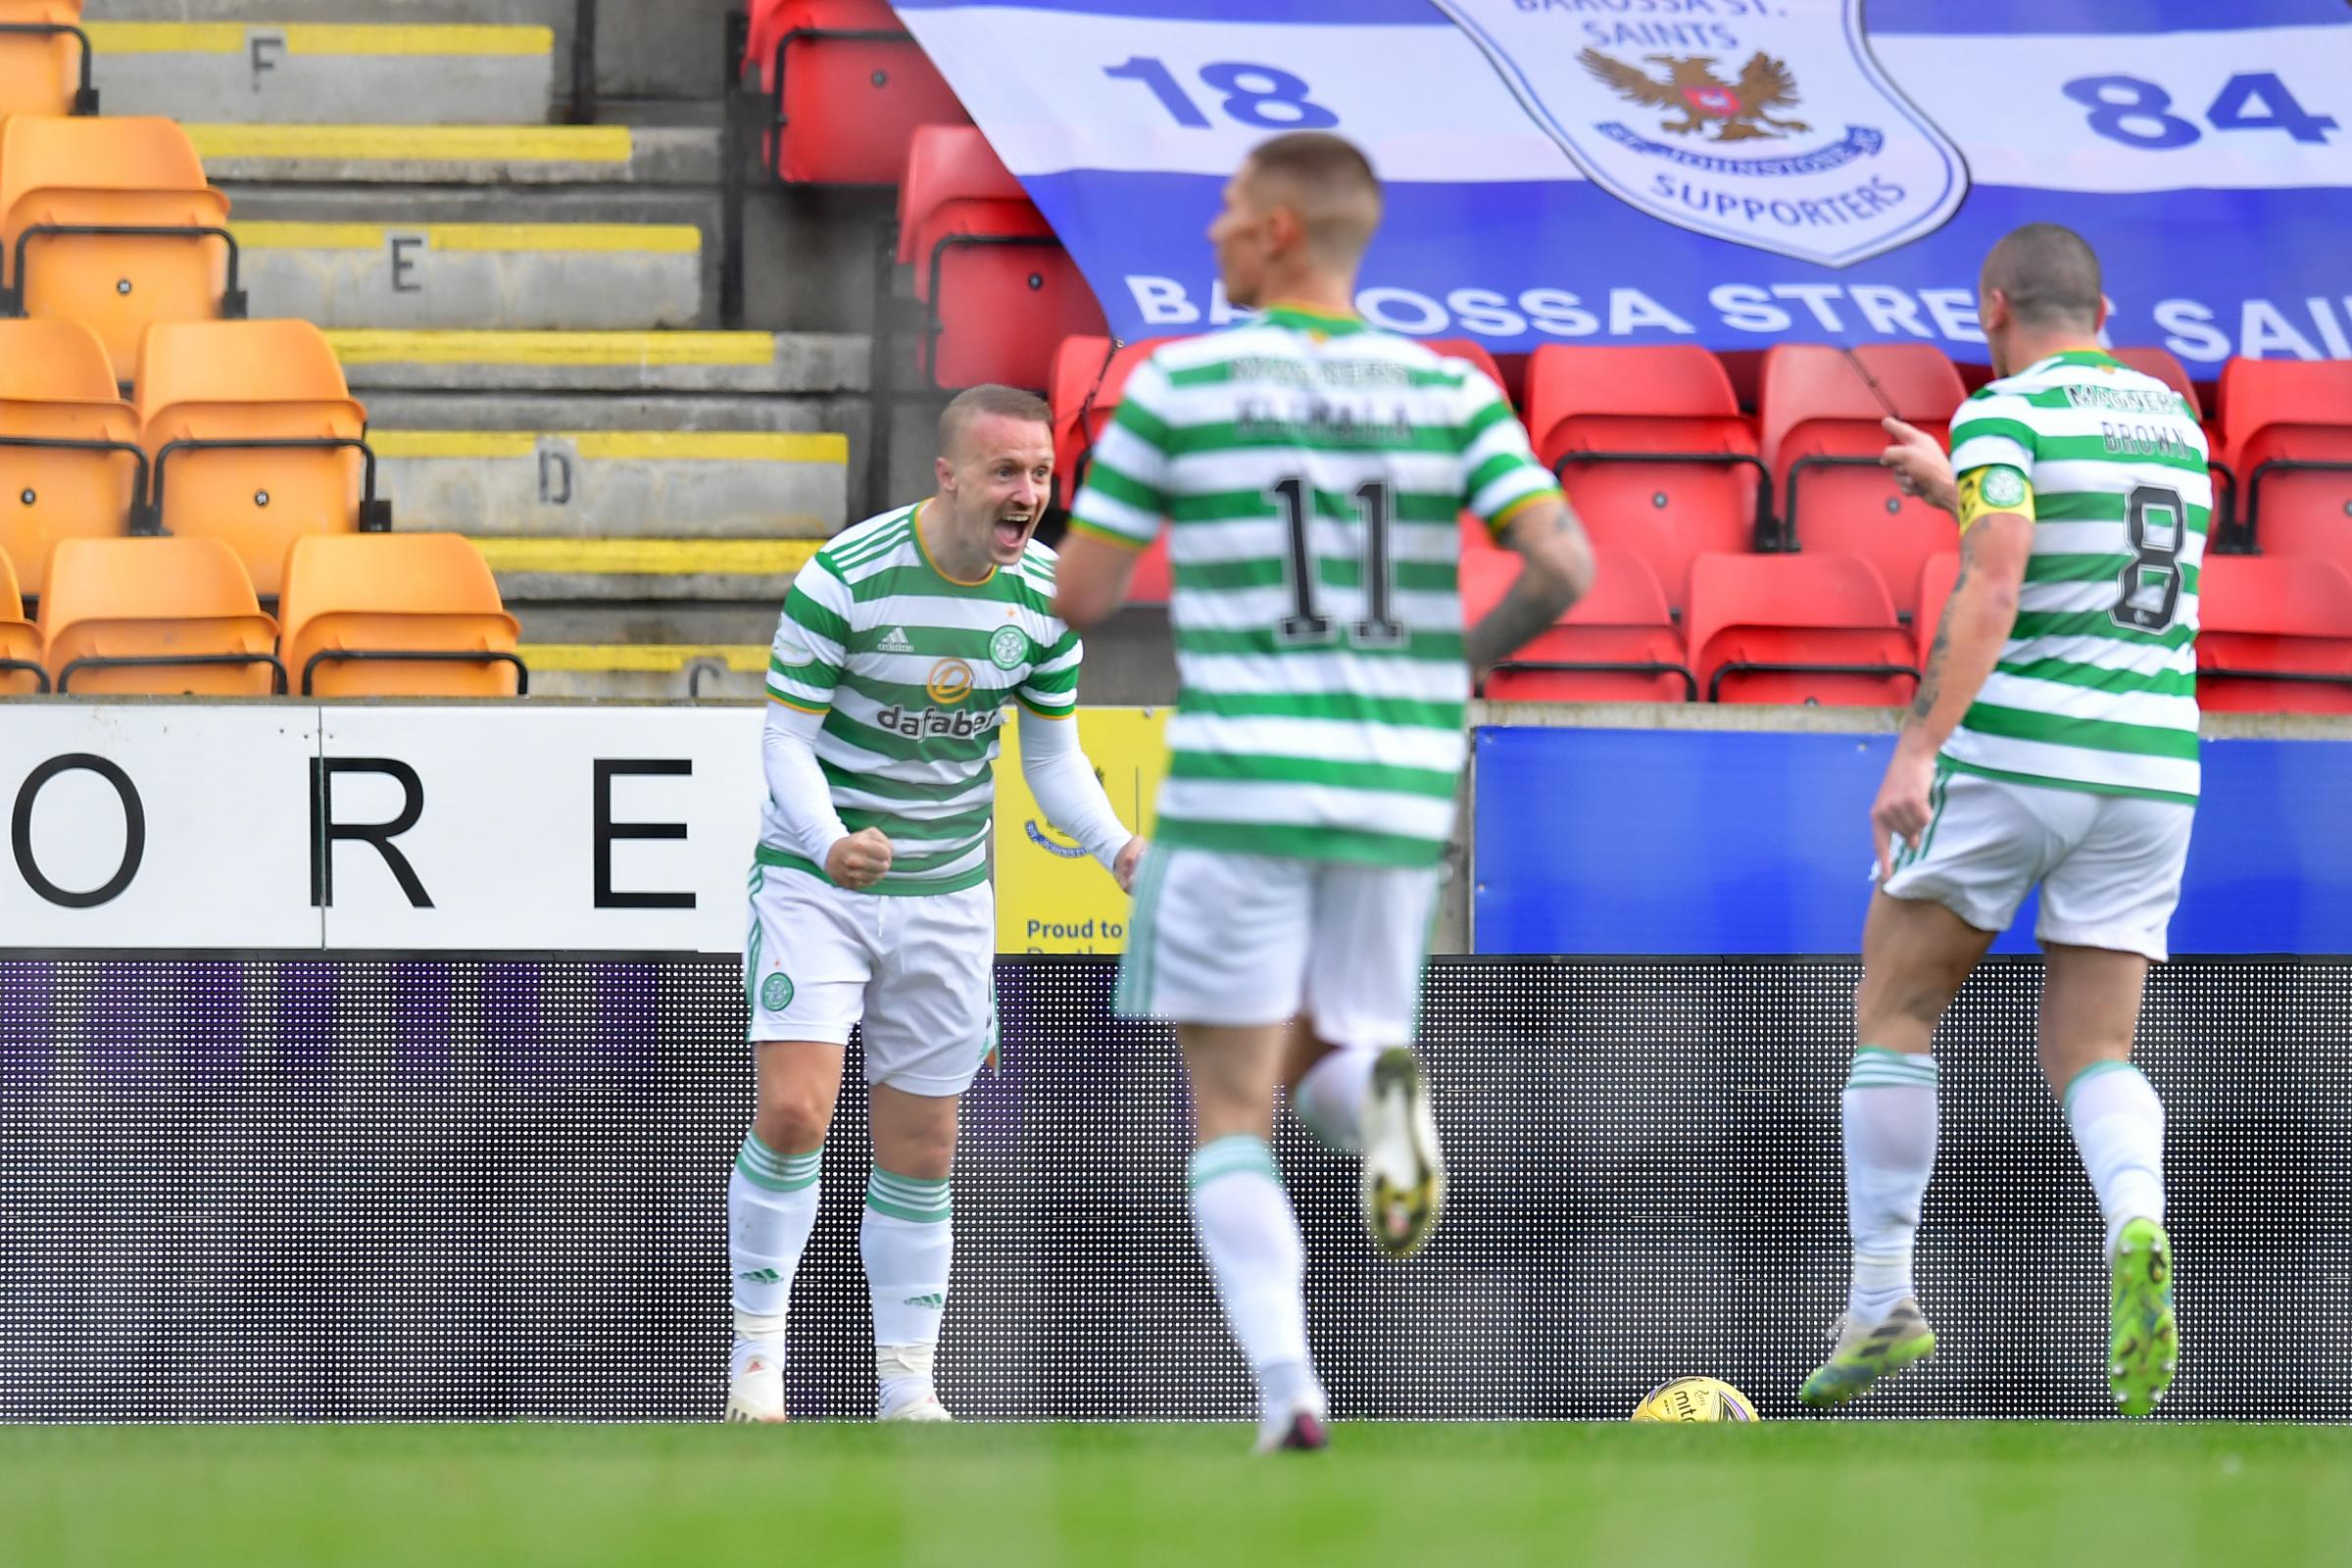 St Johnstone 0 Celtic 2: Last-gasp Griffths and Klimala steal the show as Celtic pinch the points in Perth